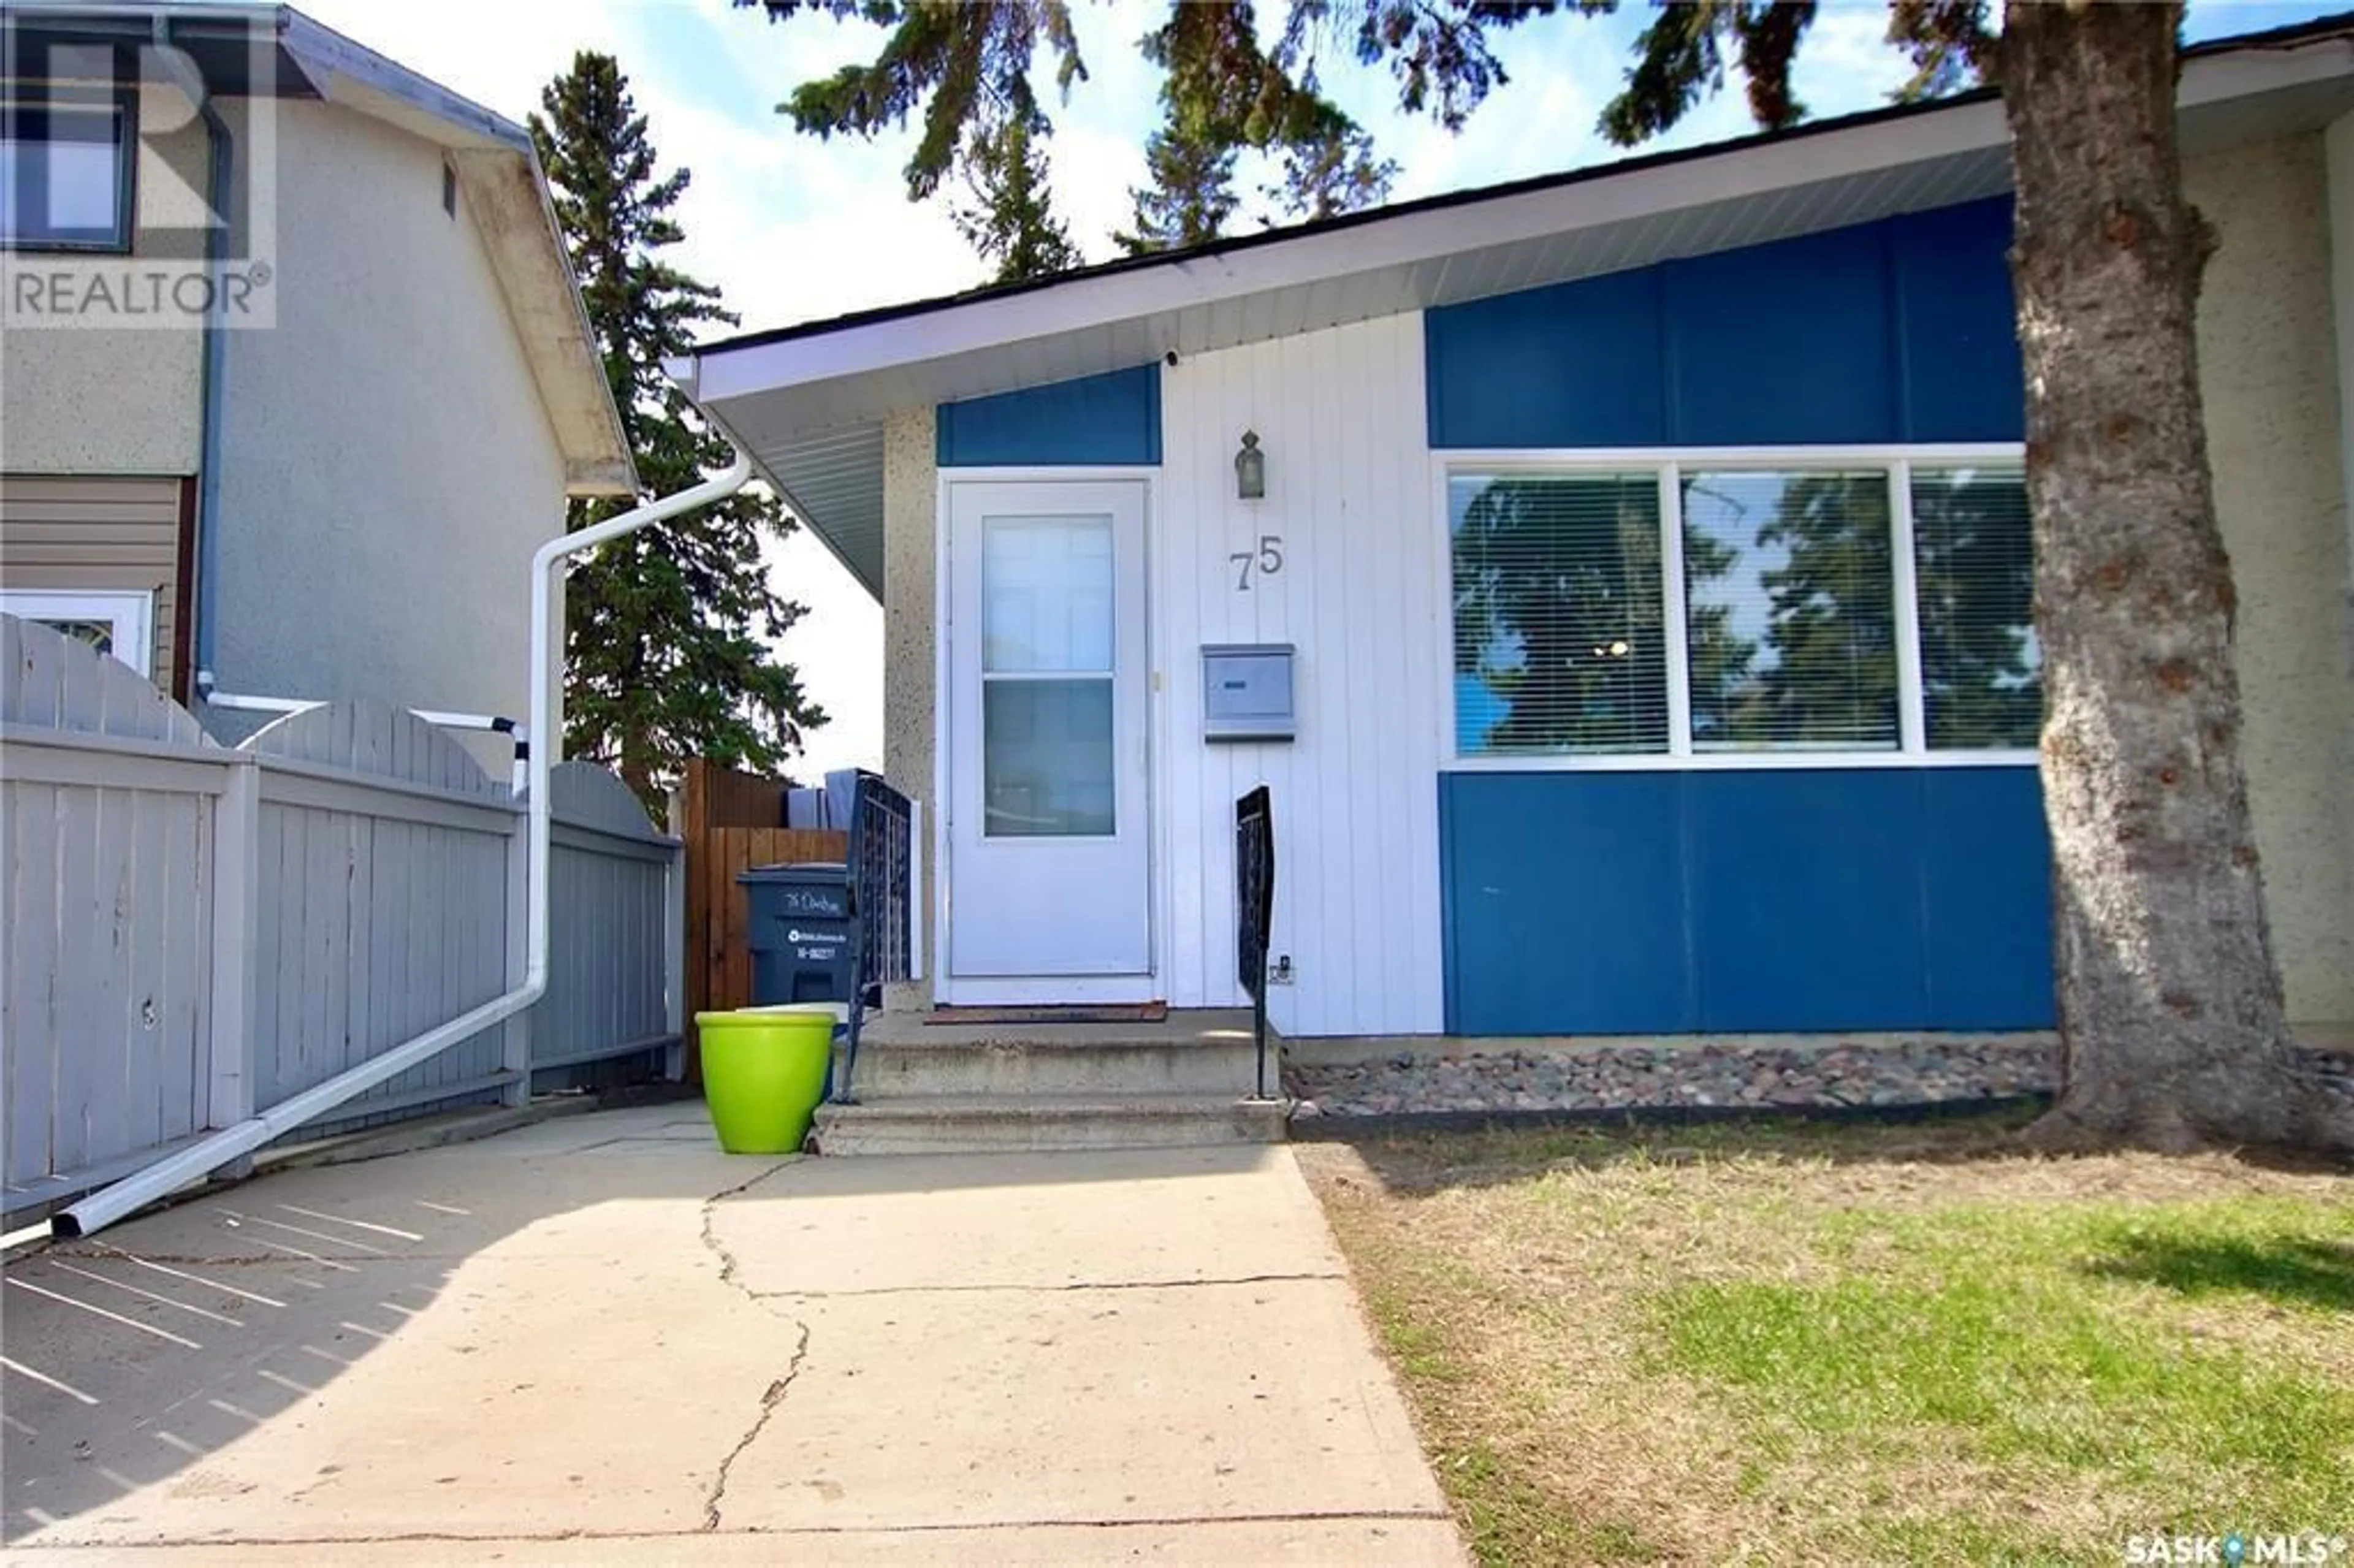 A pic from exterior of the house or condo for 75 Davidson CRESCENT, Saskatoon Saskatchewan S7L4A2